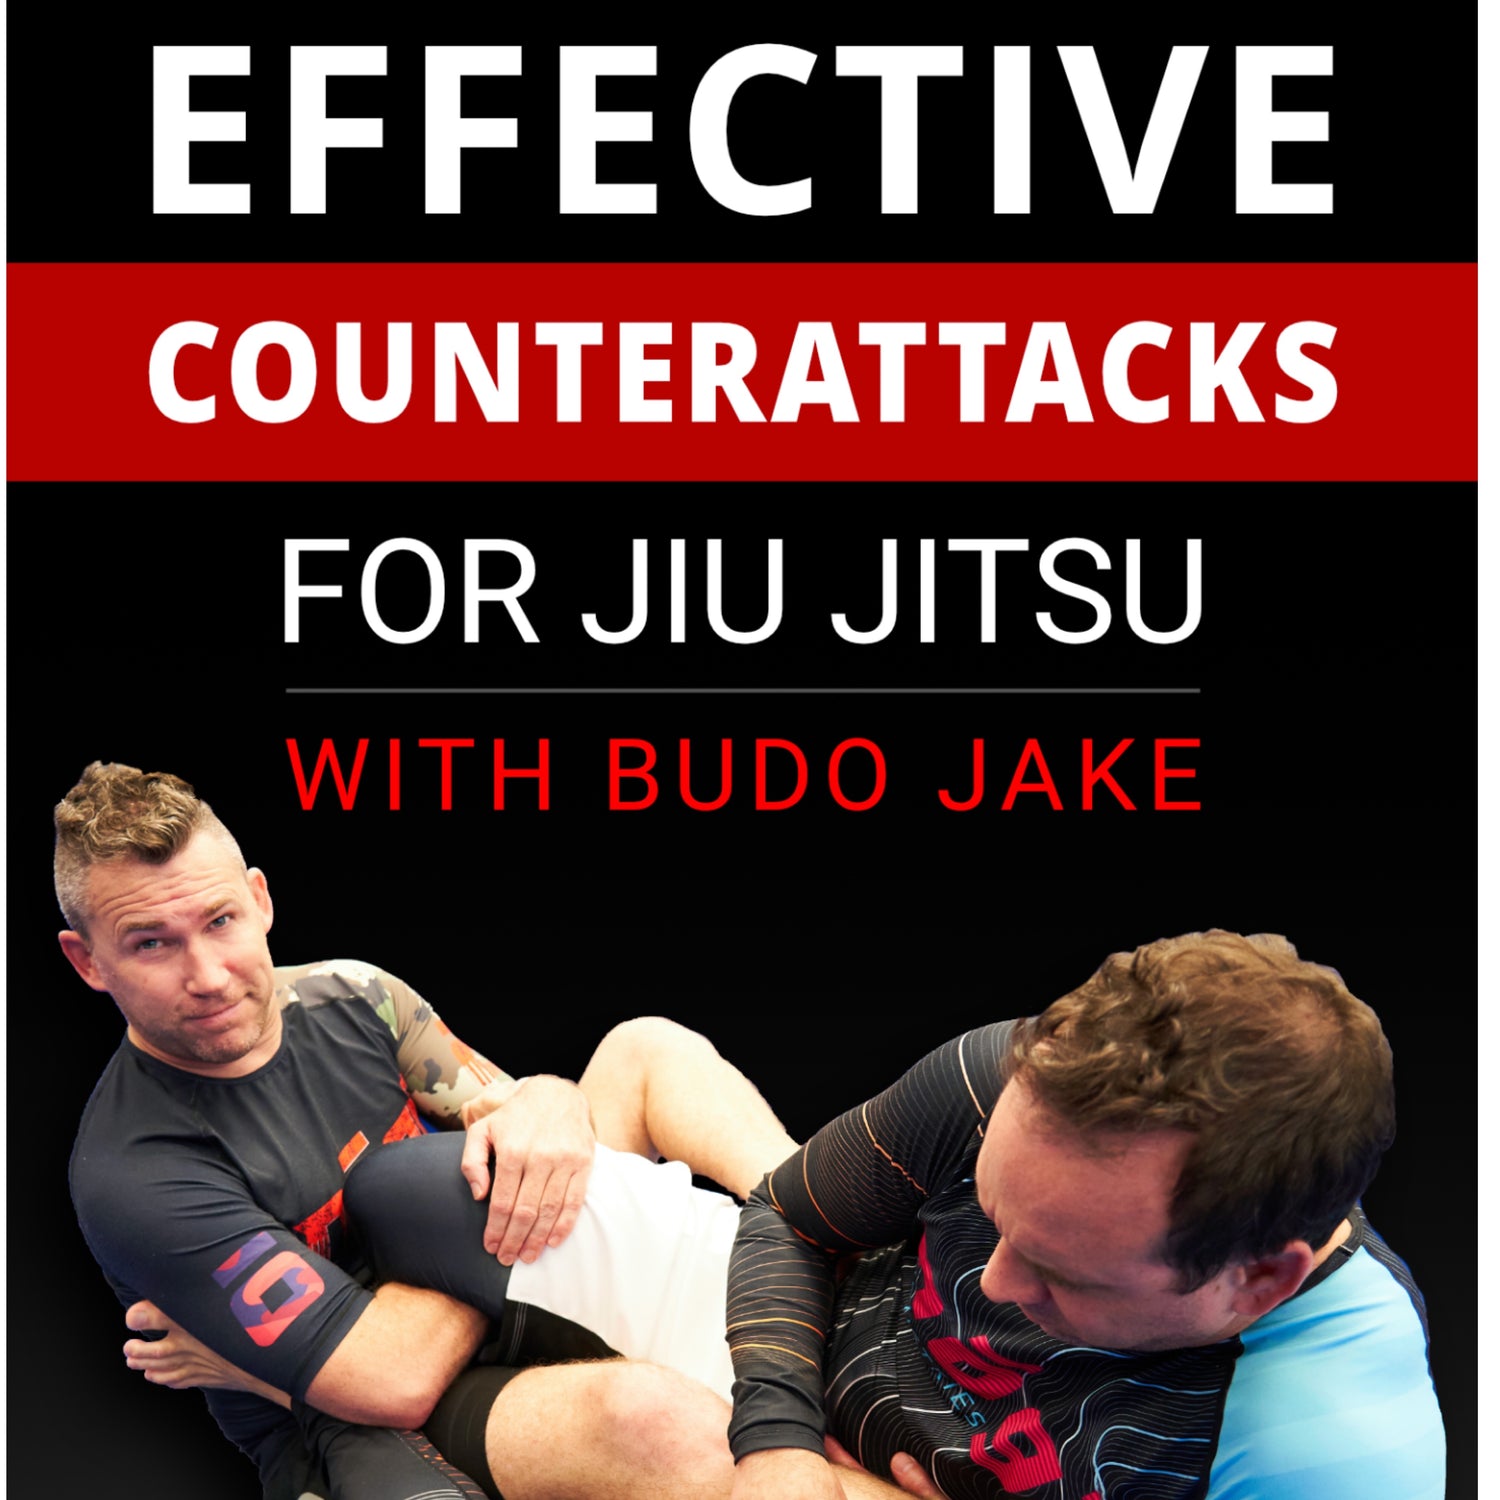 A Chat with Jake about Effective Counterattacks for Jiujitsu